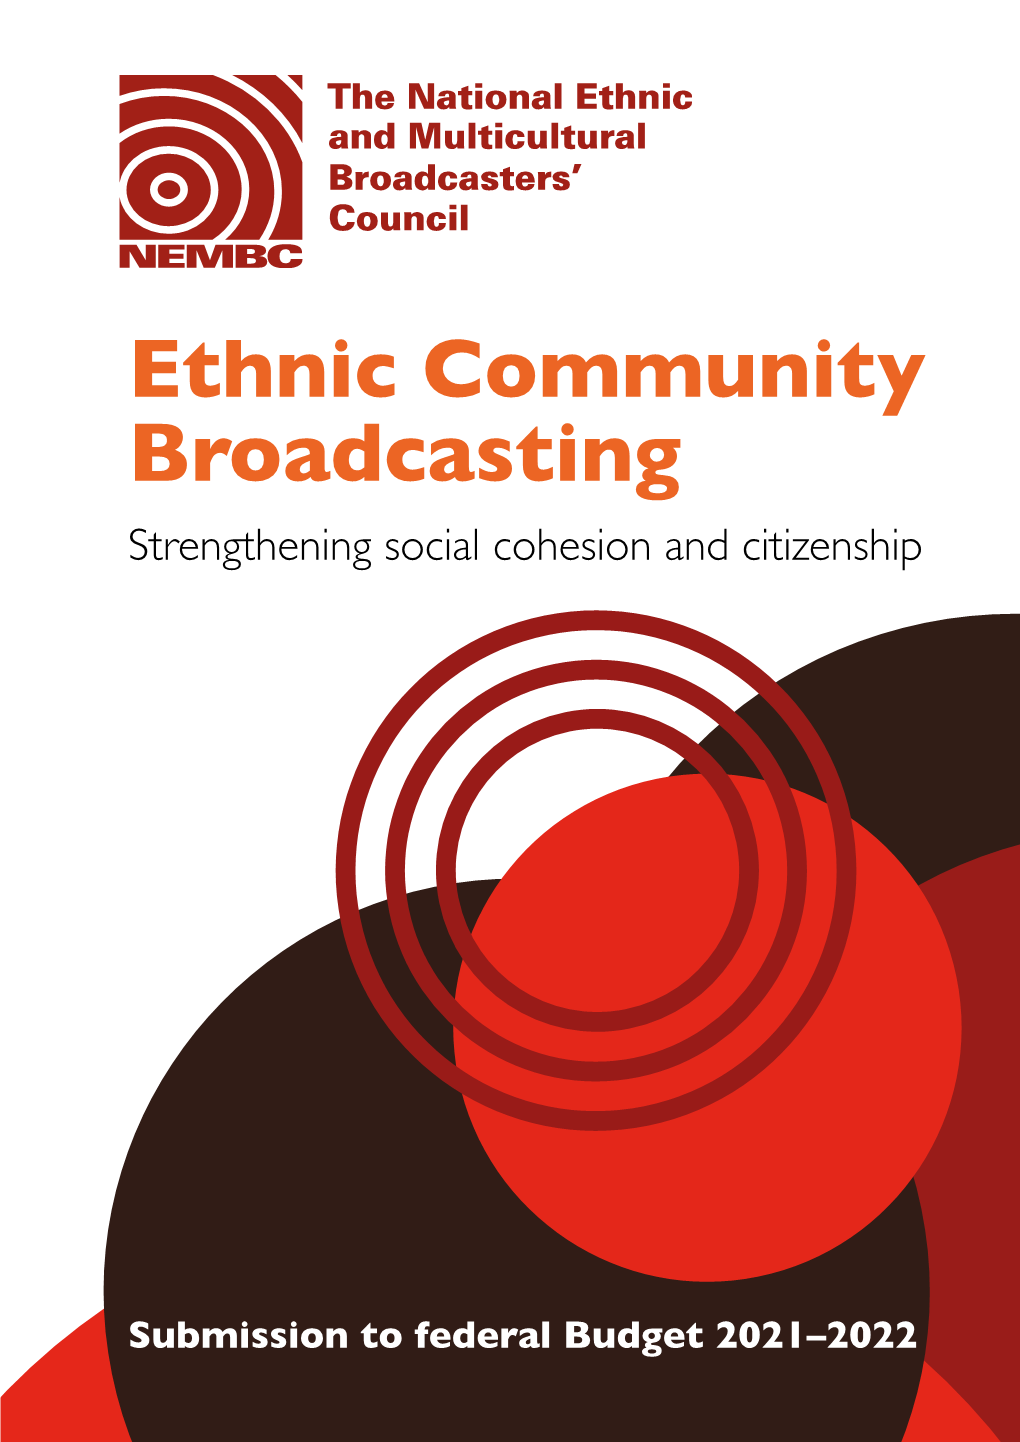 National Ethnic and Multicultural Broadcasters' Council